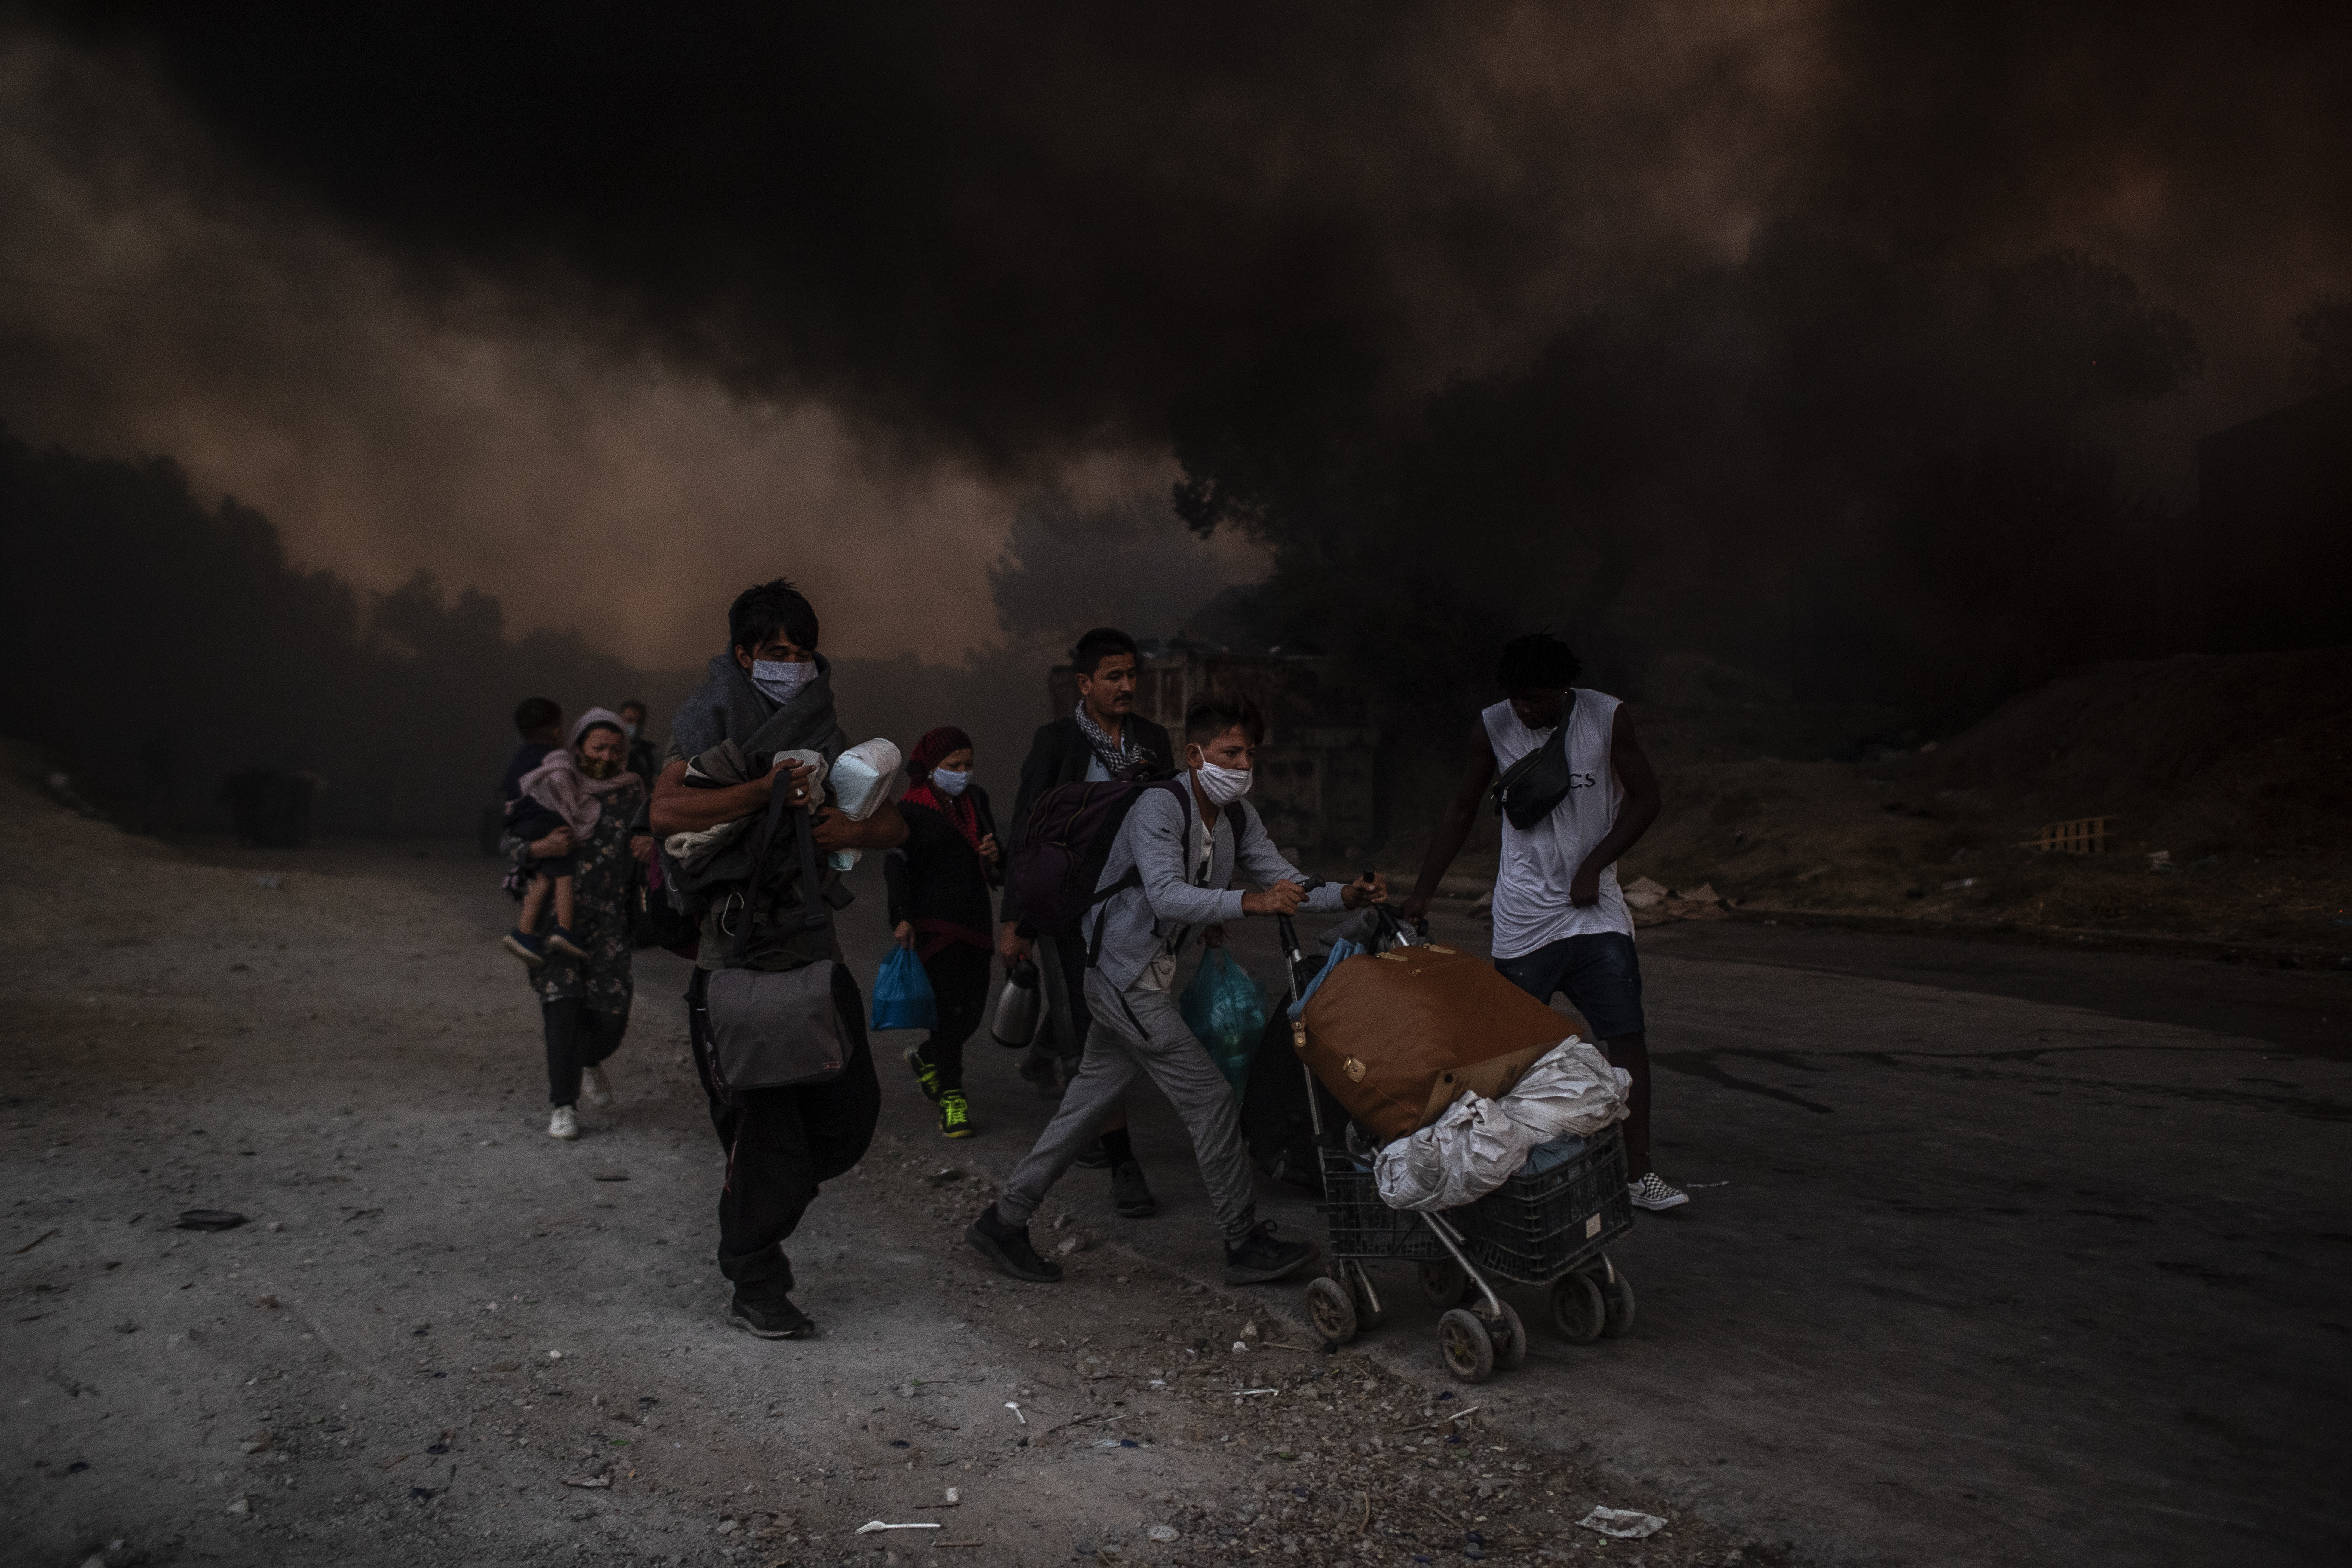 Refugees and migrants carrying their belongings flee a fire burning at the Moria camp on Lesbos island, Greece, Wednesday, Sept. 9, 2020. Moria camp's life ended as it began, in drama: Successive fires that started before dawn on Sept. 9 devastating the site and making 12,000 inhabitants homeless during a COVD-19 lockdown.(AP Photo/Petros Giannakouris)